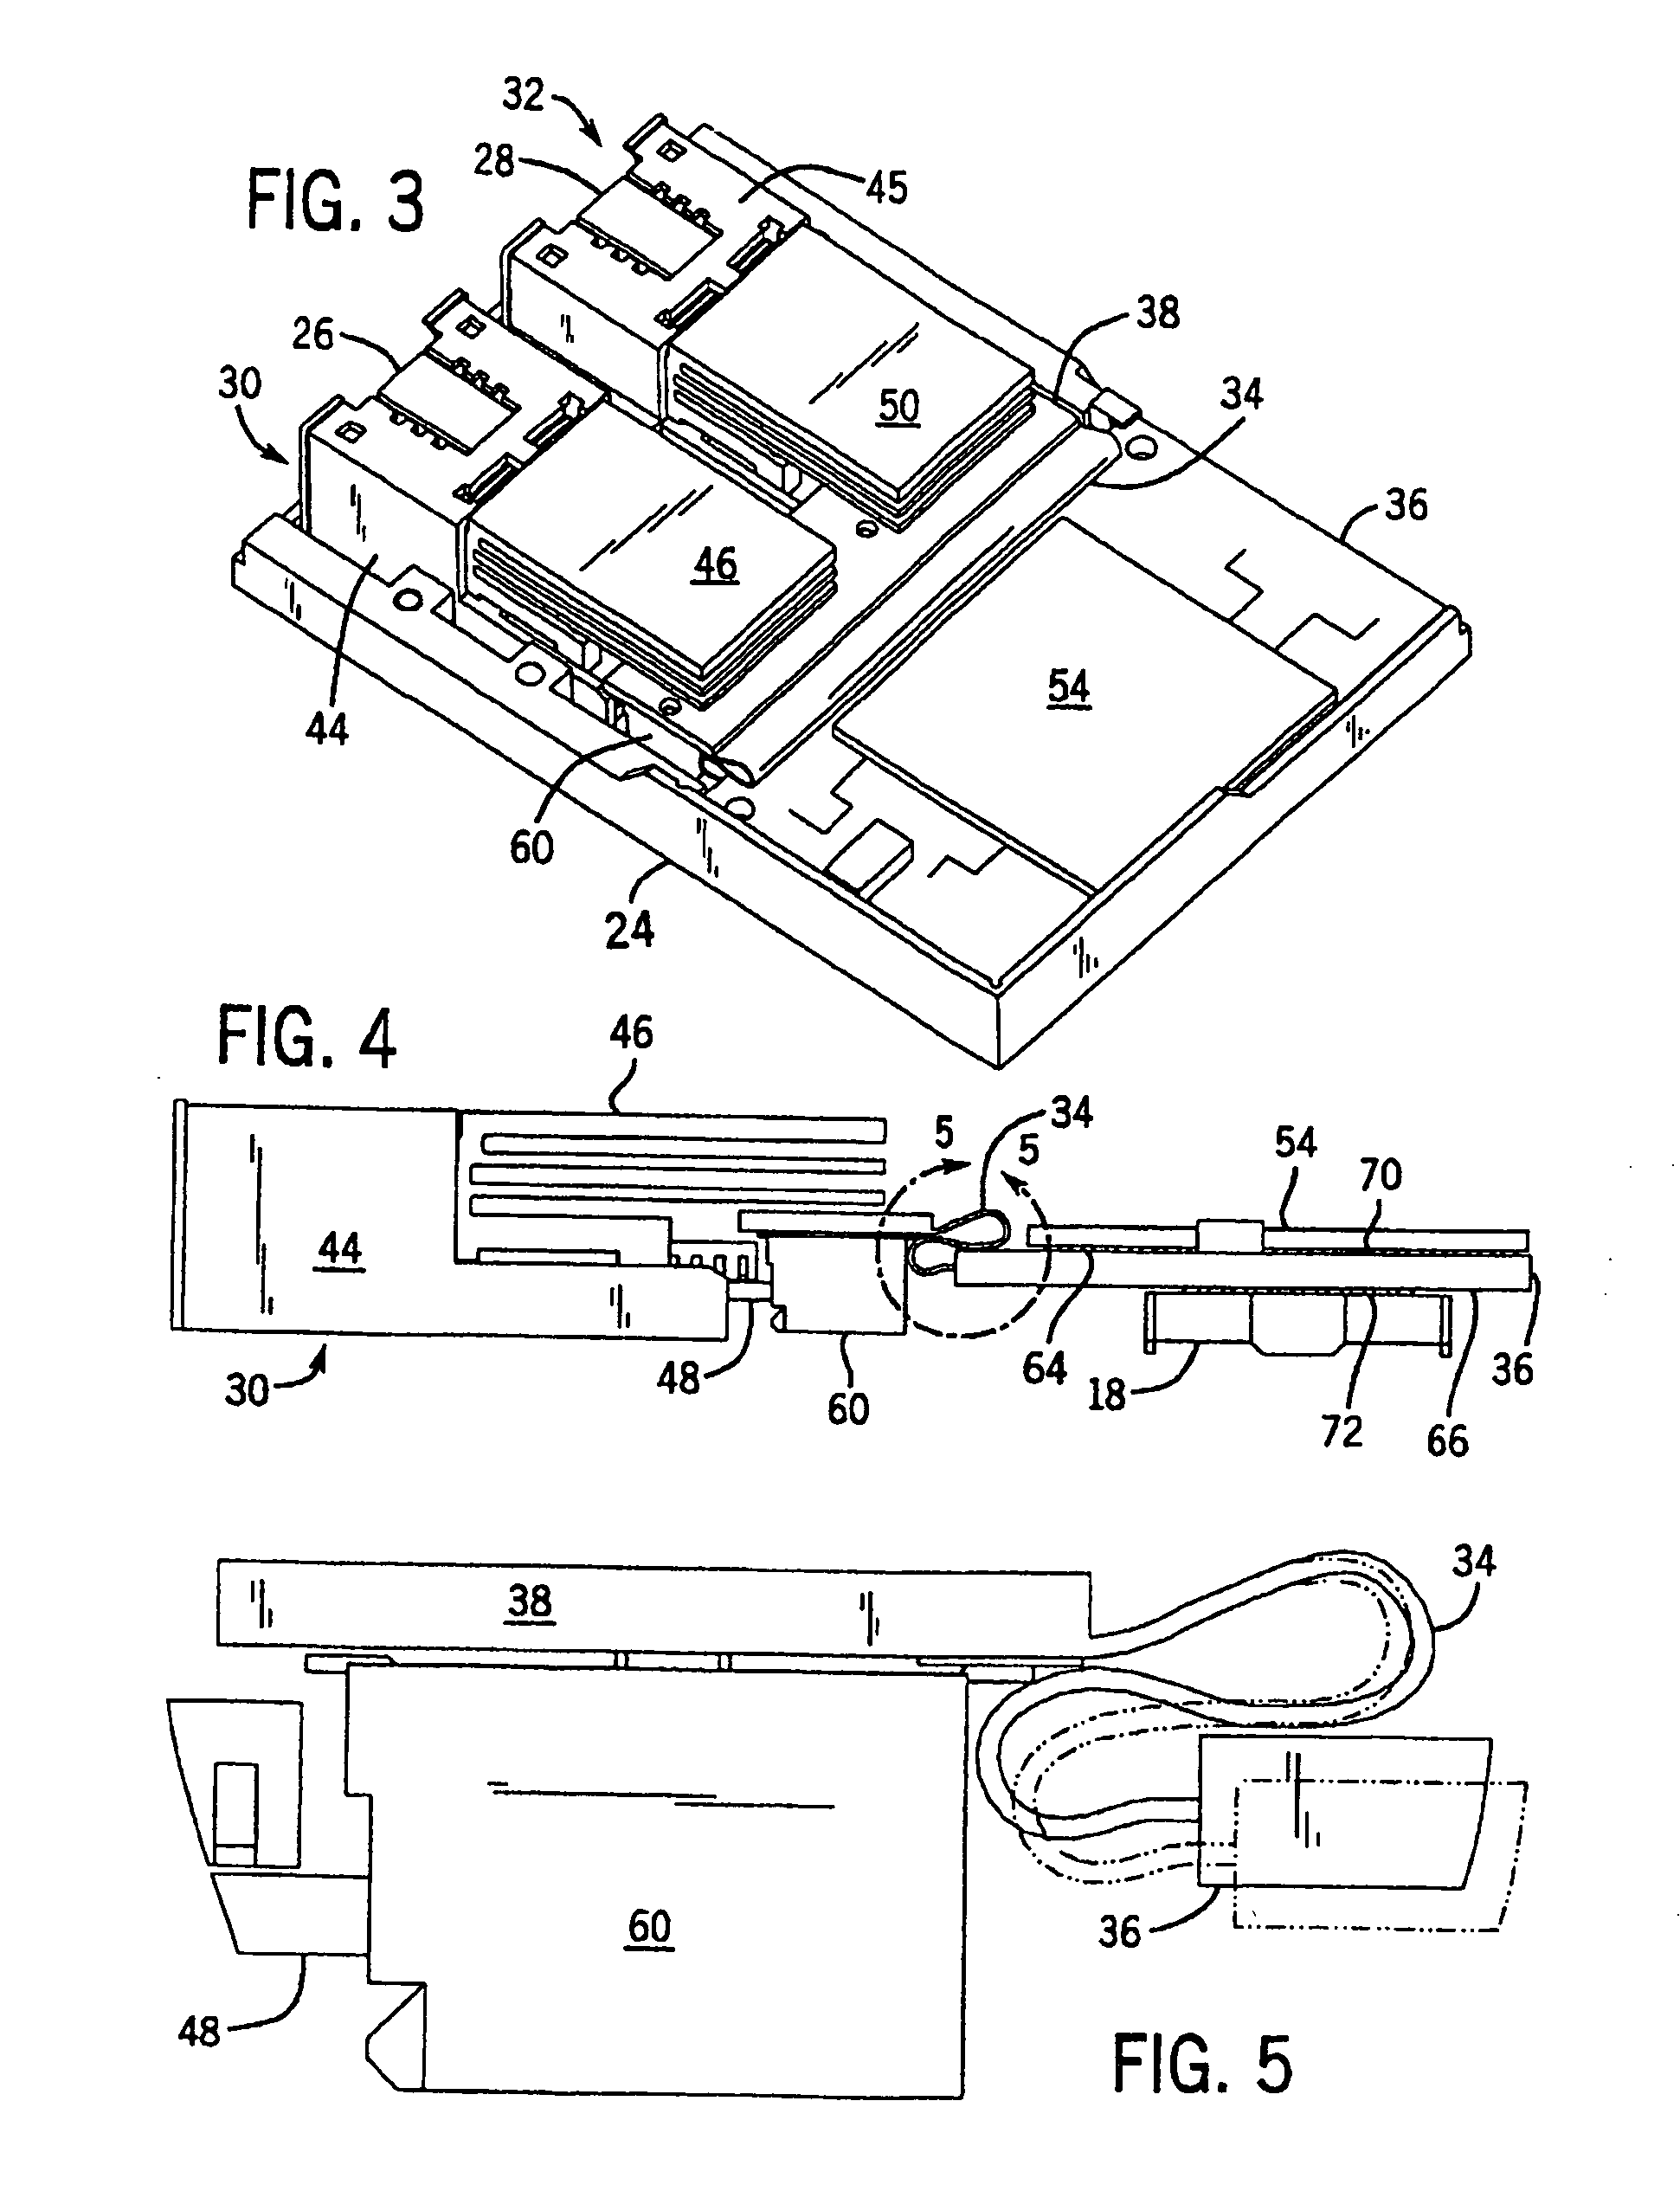 Transponder assembly for use with parallel optics modules in fiber optic communications systems